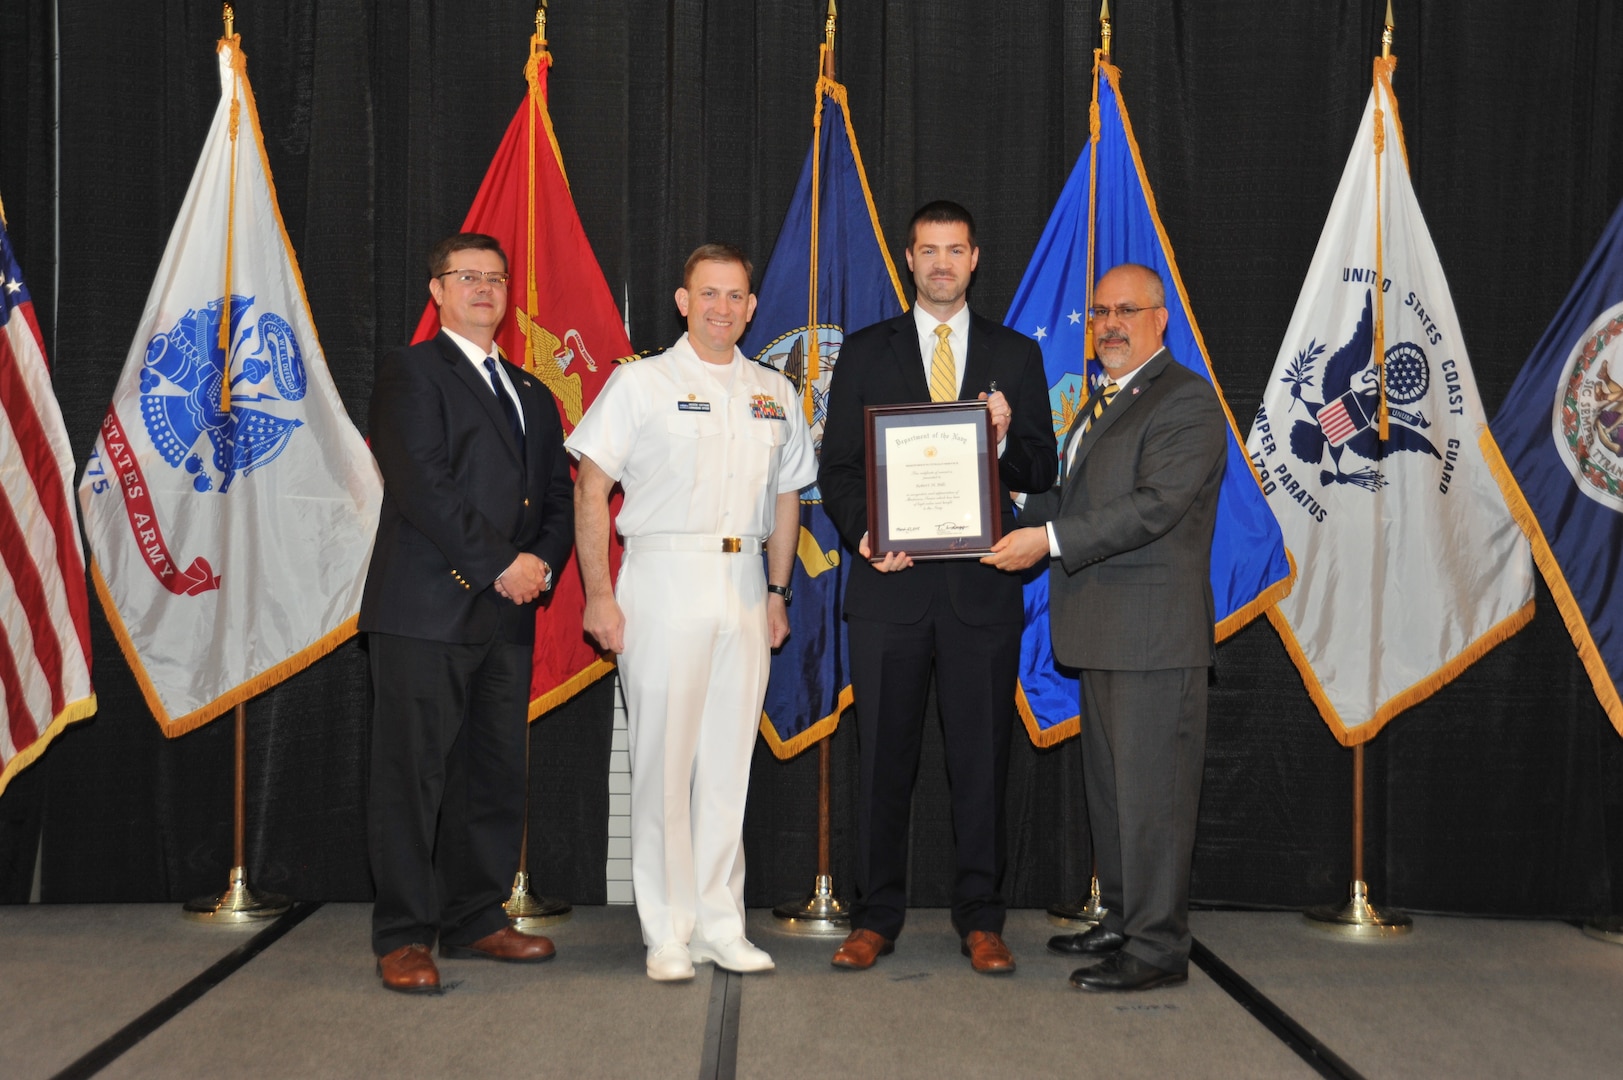 IMAGE: Robert Bills is presented the Navy Meritorious Civilian Service Award at Naval Surface Warfare Center Dahlgren Division's annual awards ceremony, Apr. 26 at the Fredericksburg Expo and Conference Center.